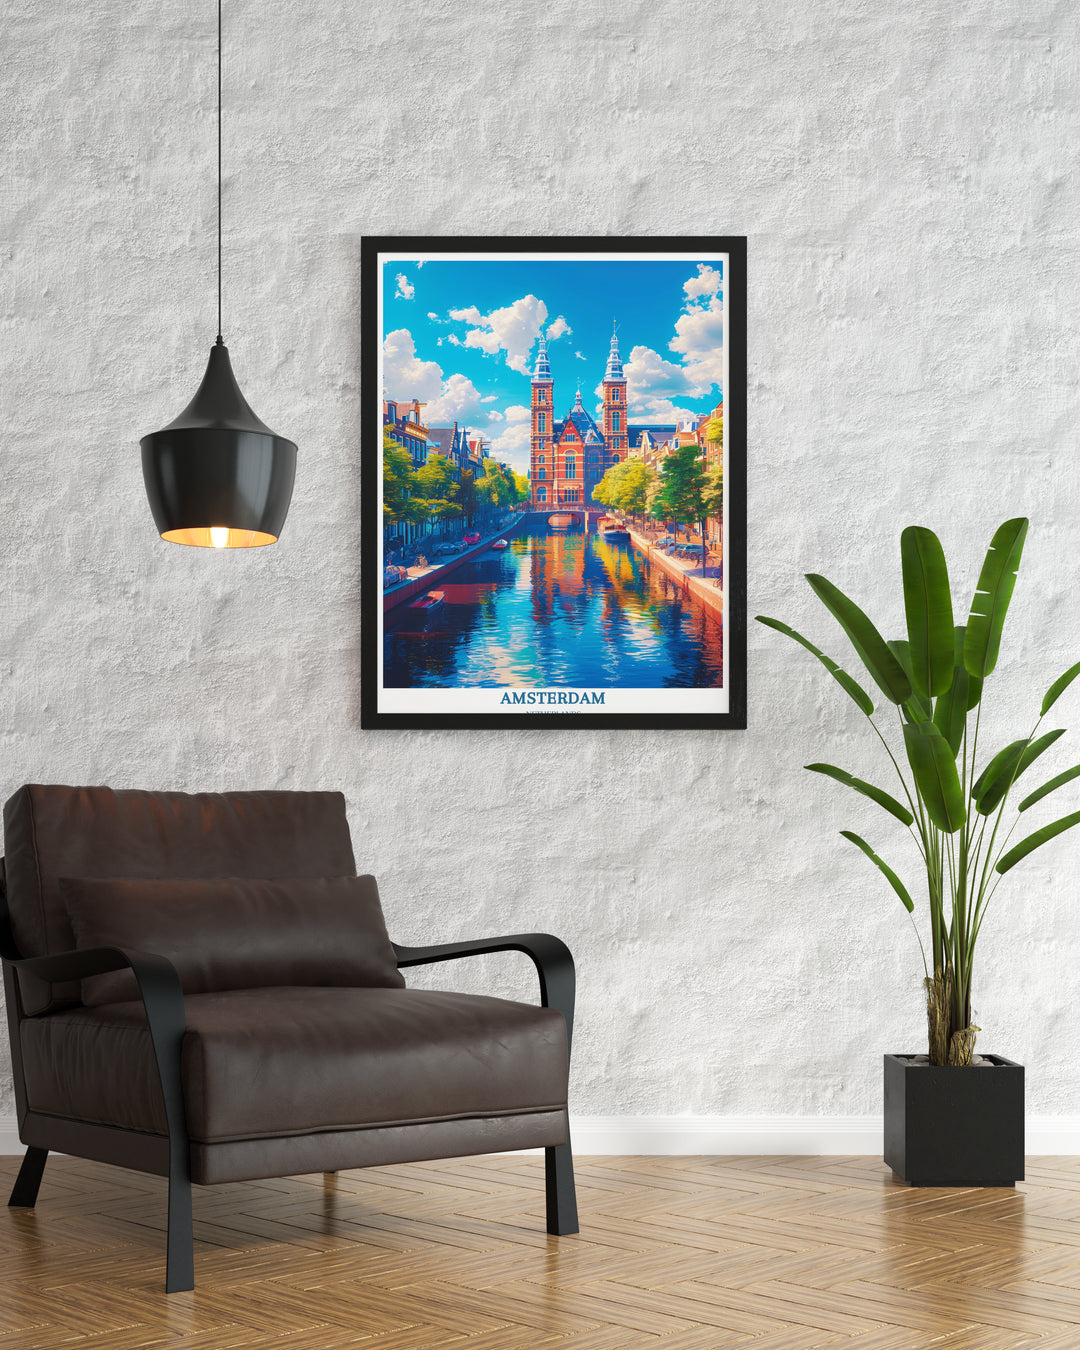 Netherlands-inspired wall art: This Amsterdam Travel Poster brings Dutch charm to any room.